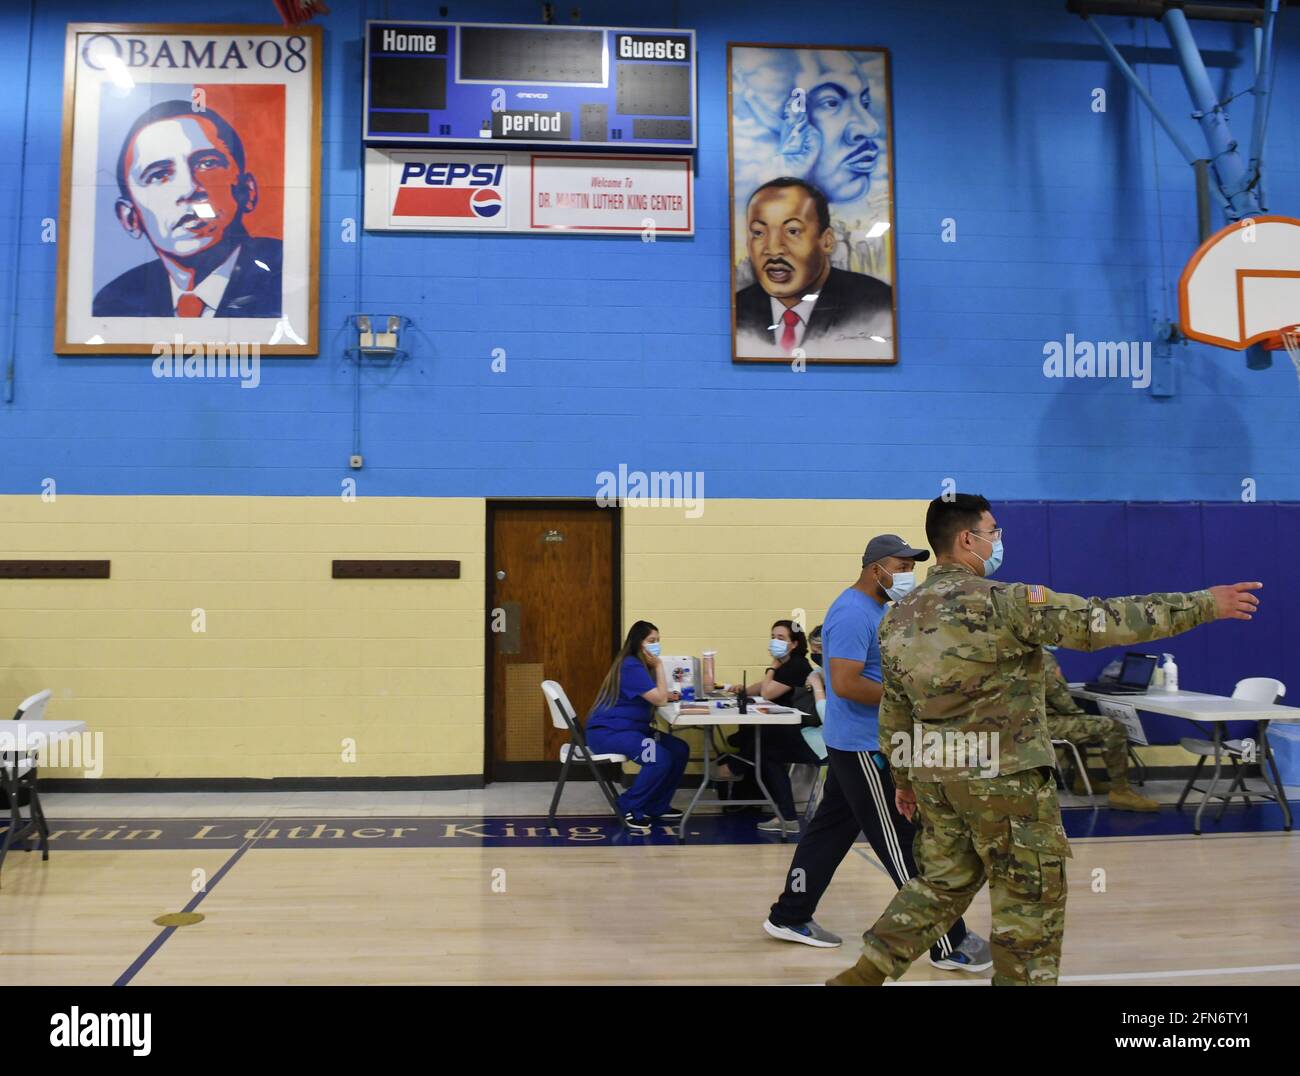 Racine, Wisconsin, USA. 14th May, 2021. Large portraits of former president Barack Obama and Rev. Martin Luther King Jr. hang in the gymnasium of the King Community Center in Racine, Wisconsin where the city health department held a COVID-19 vaccination clinic with the help of the Wisconsin National Guard Friday May 14, 2021. Doses of the Pfizer vaccine were administered to people. No appointments were necessary. (Credit Image: © Mark HertzbergZUMA Wire) Stock Photo